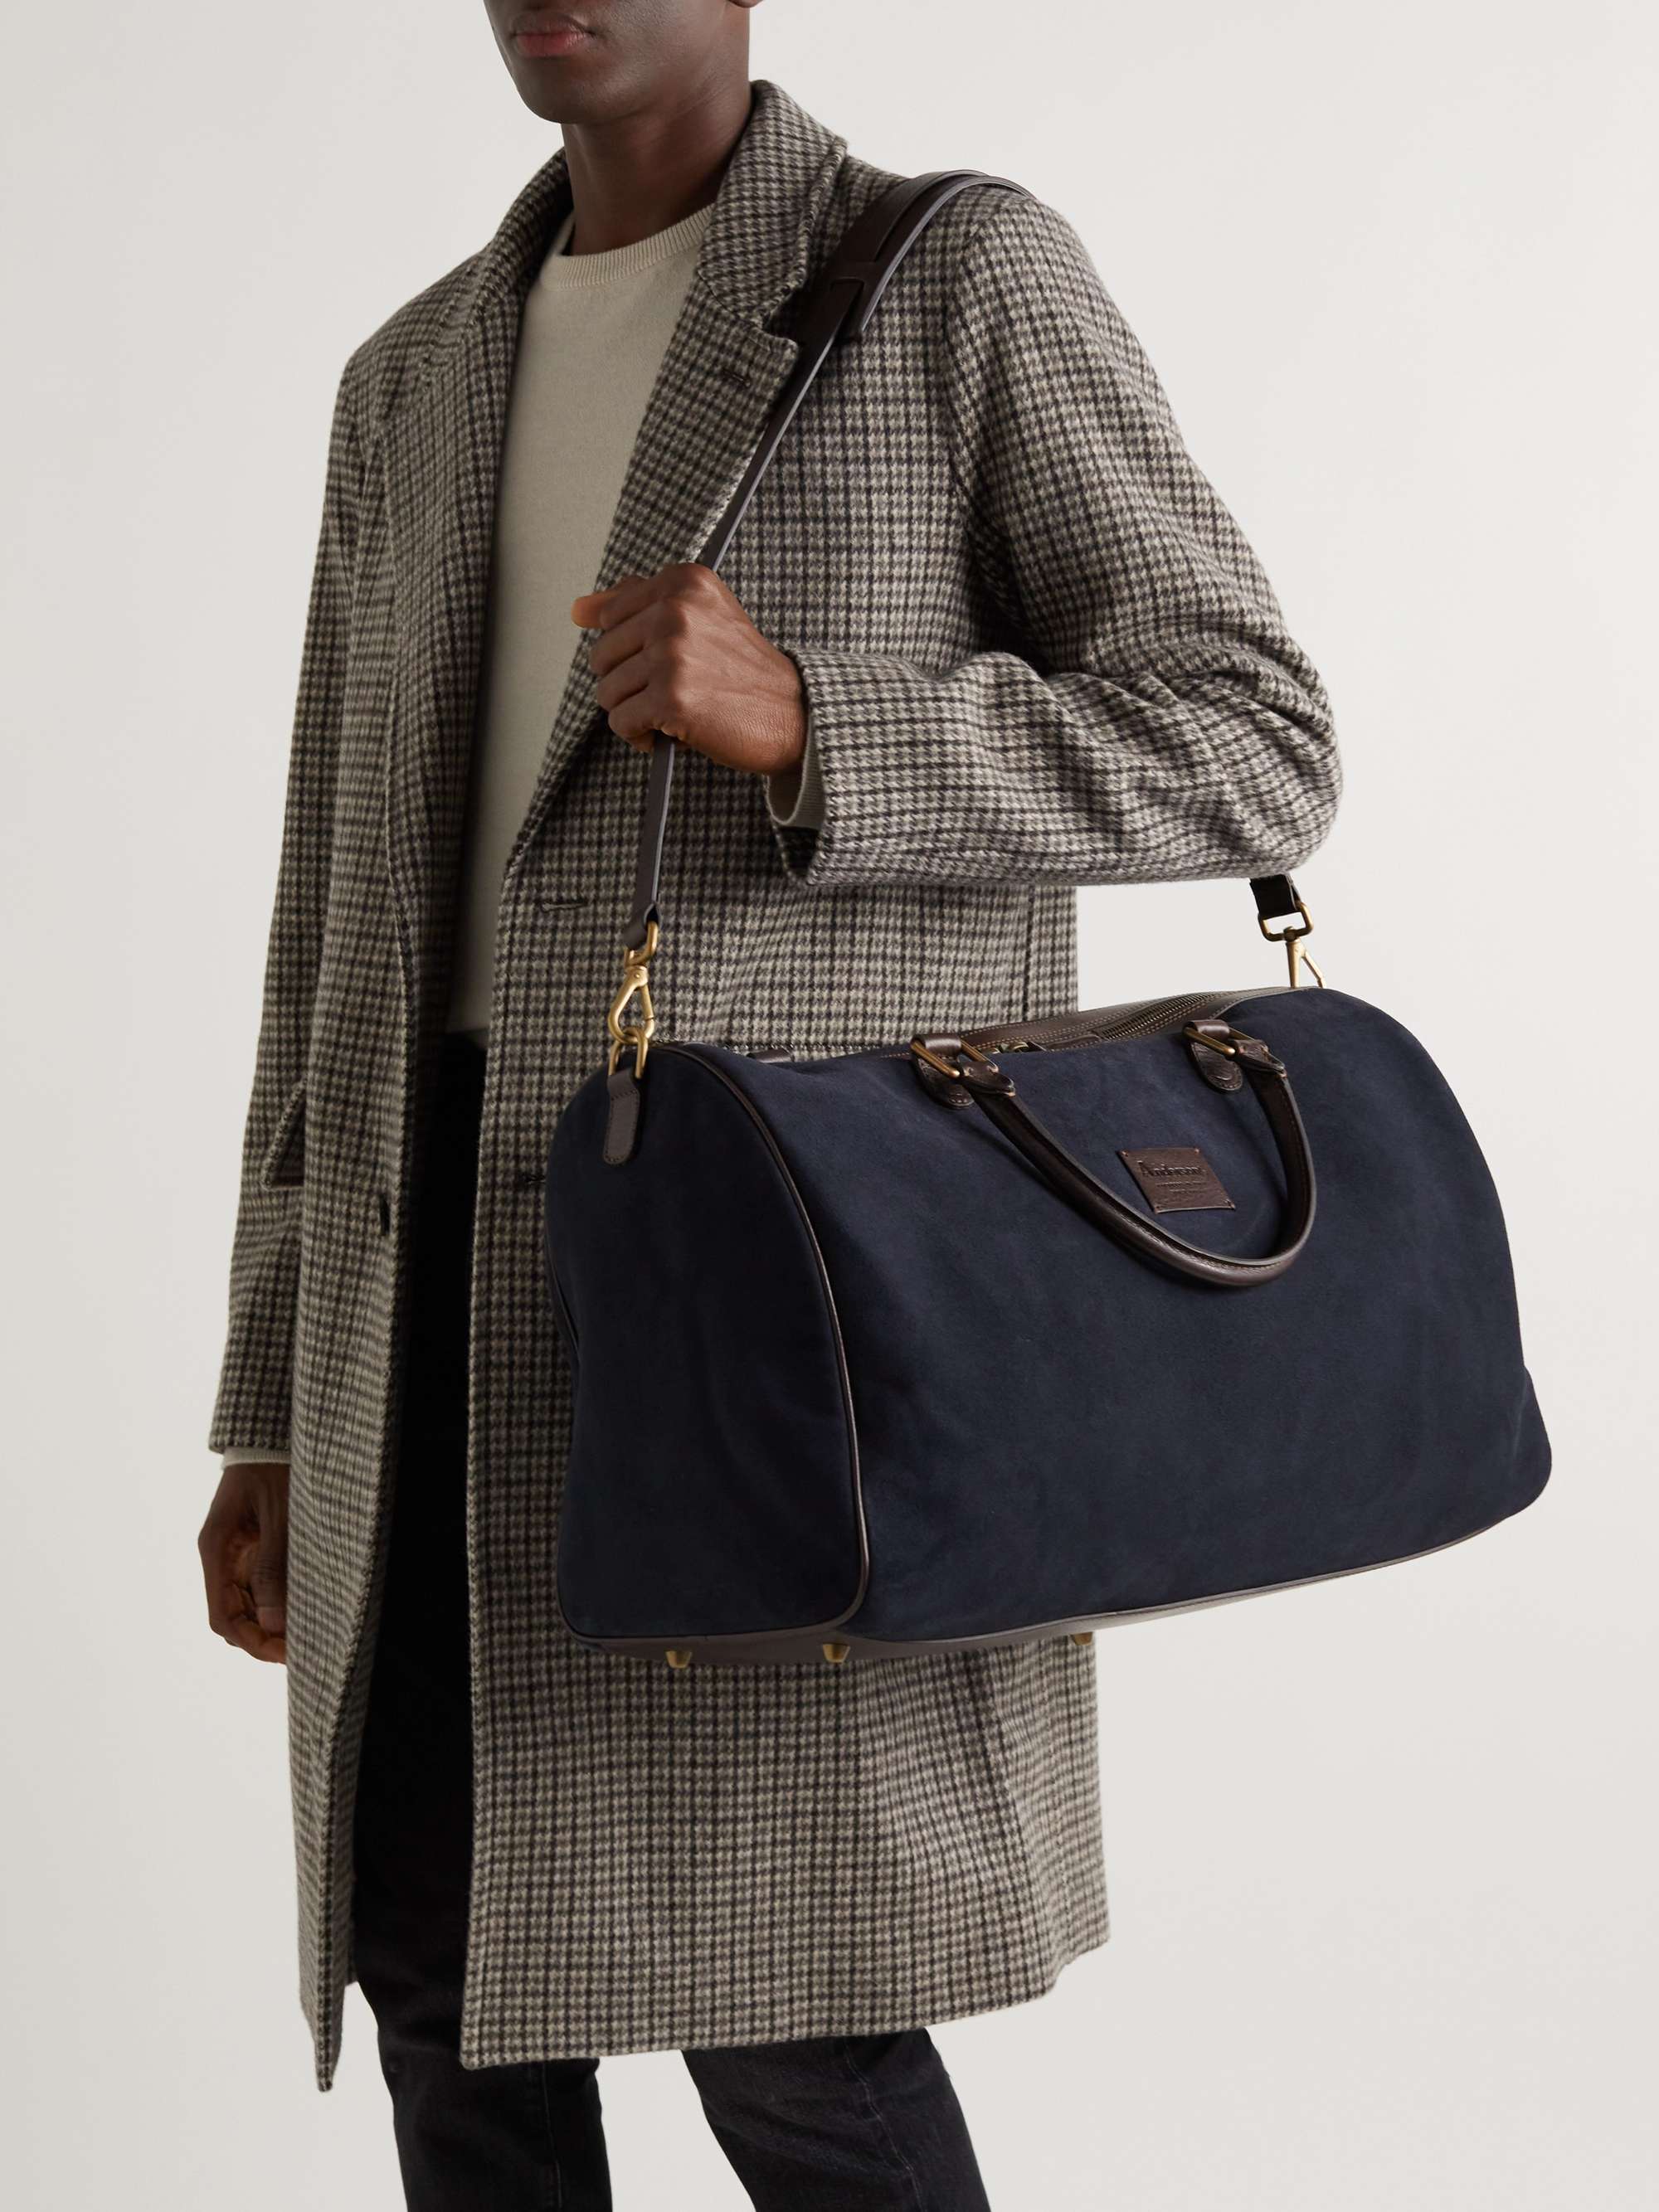 ANDERSON'S Leather-Trimmed Suede Duffle Bag